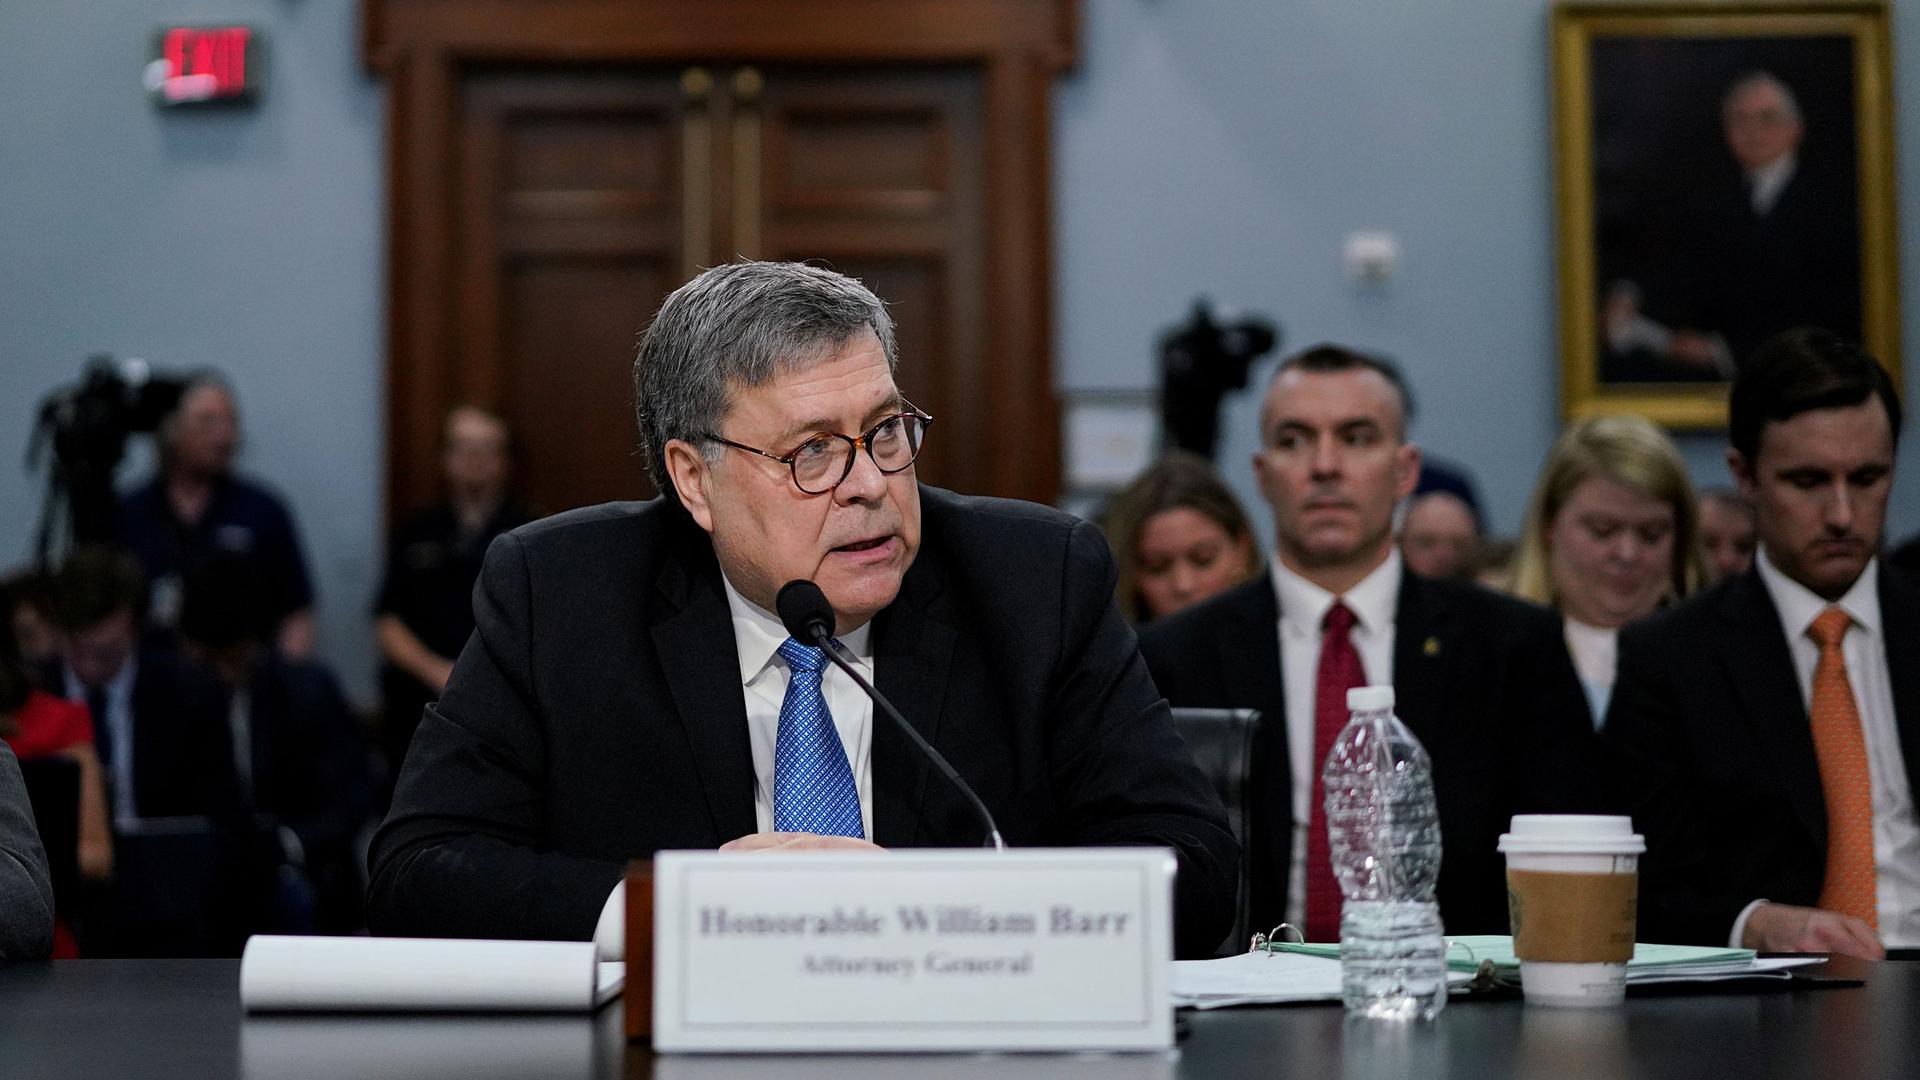 US Attorney General William Barr is shown sitting at a table behind a microphone and a sign with his name printed on it in soft focus.